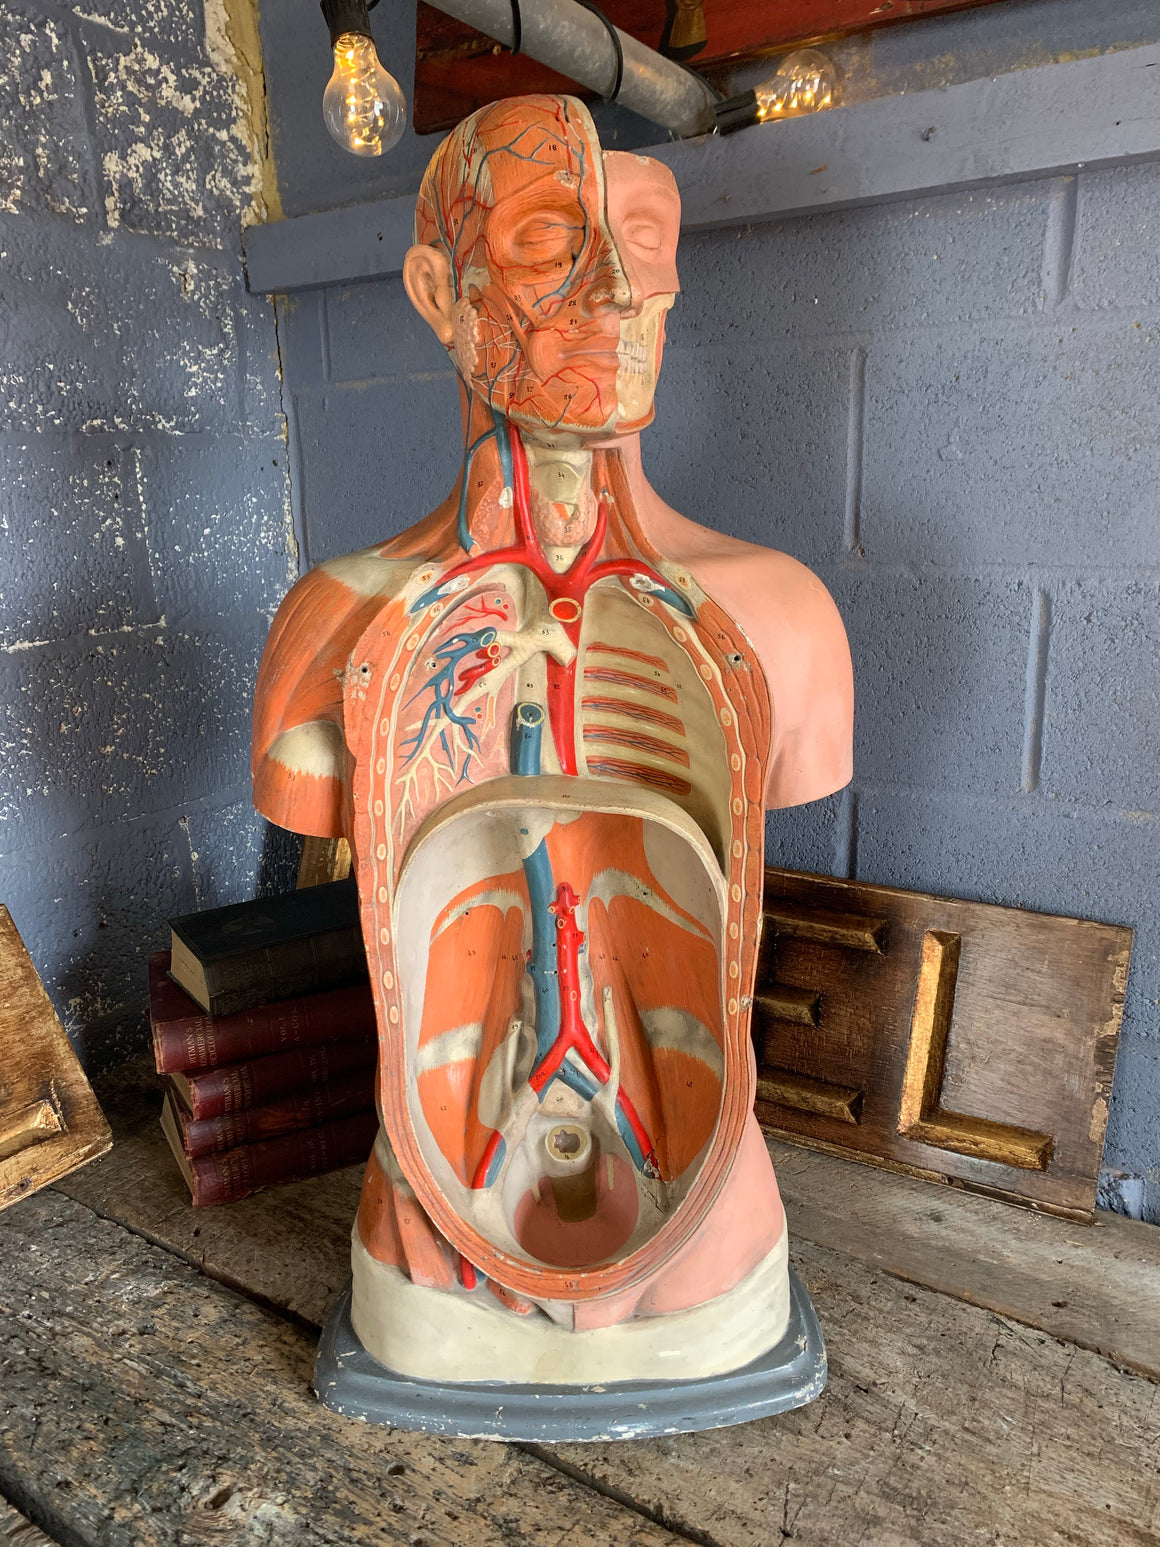 An early anatomical model of the torso